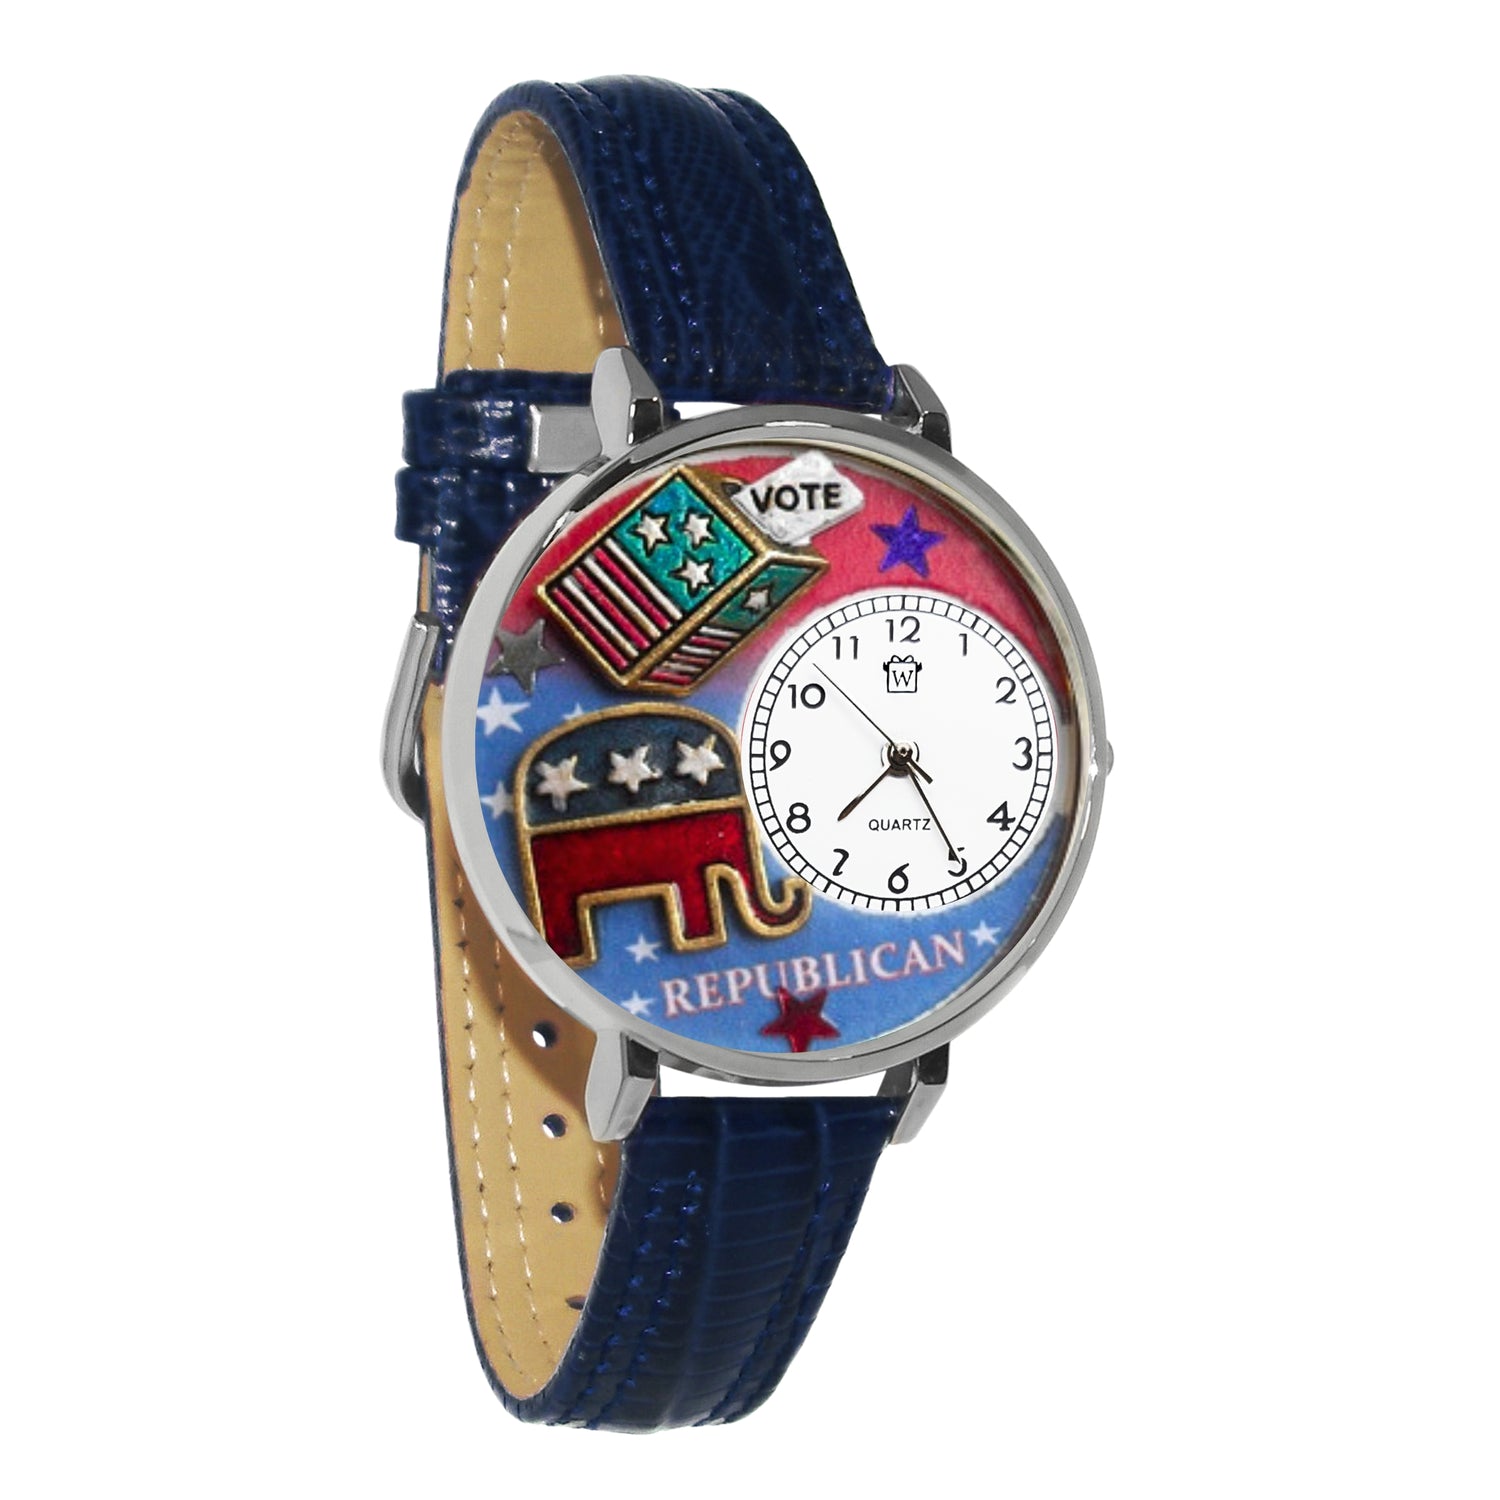 Whimsical Gifts | Republican 3D Watch Large Style | Handmade in USA | Patriotic |  | Novelty Unique Fun Miniatures Gift | Silver Finish Navy Blue Leather Watch Band